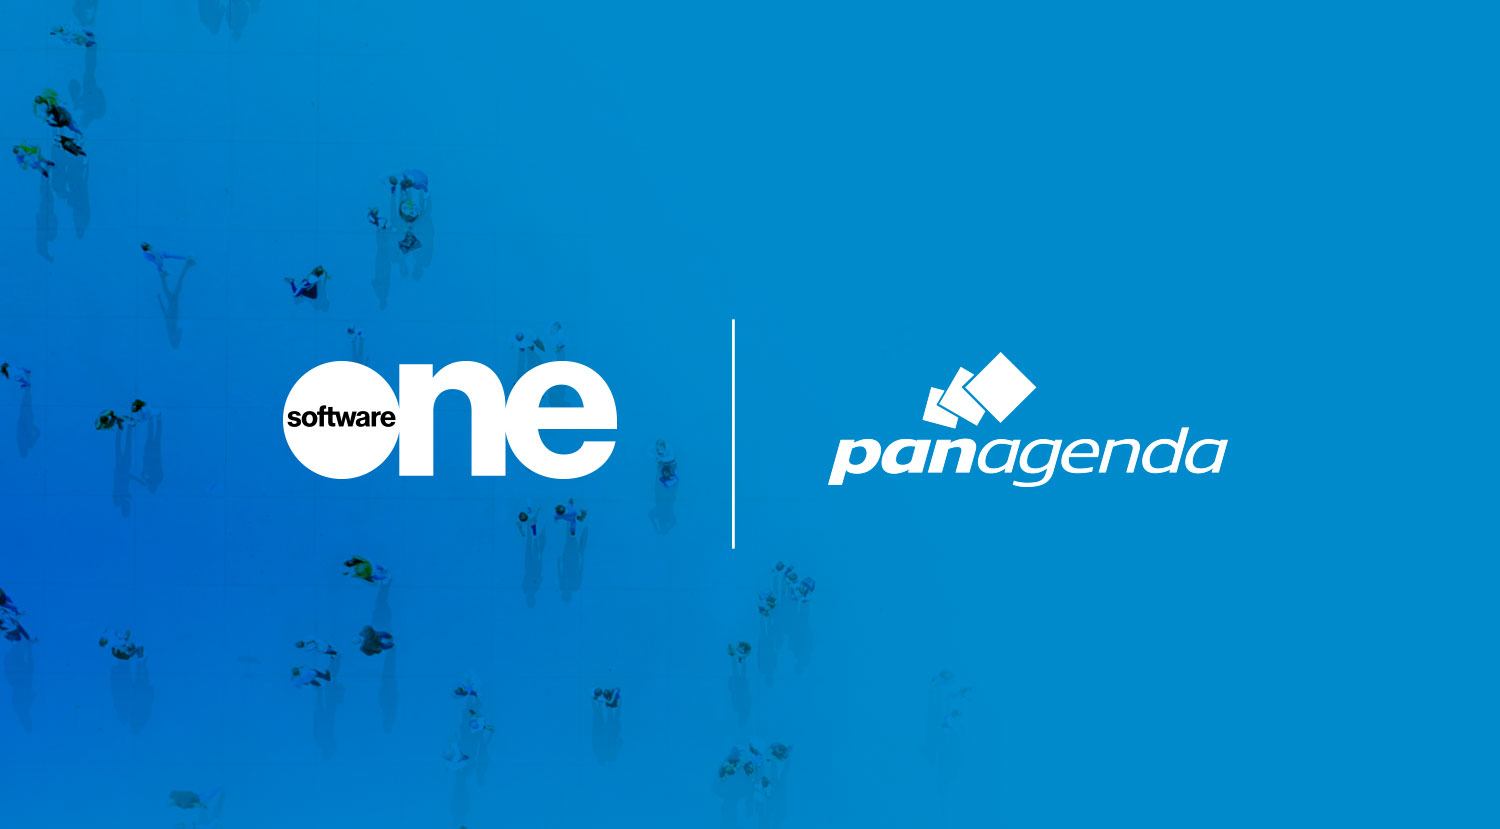 SoftwareONE & panagenda: Working Together Towards Better End-User Experience Management